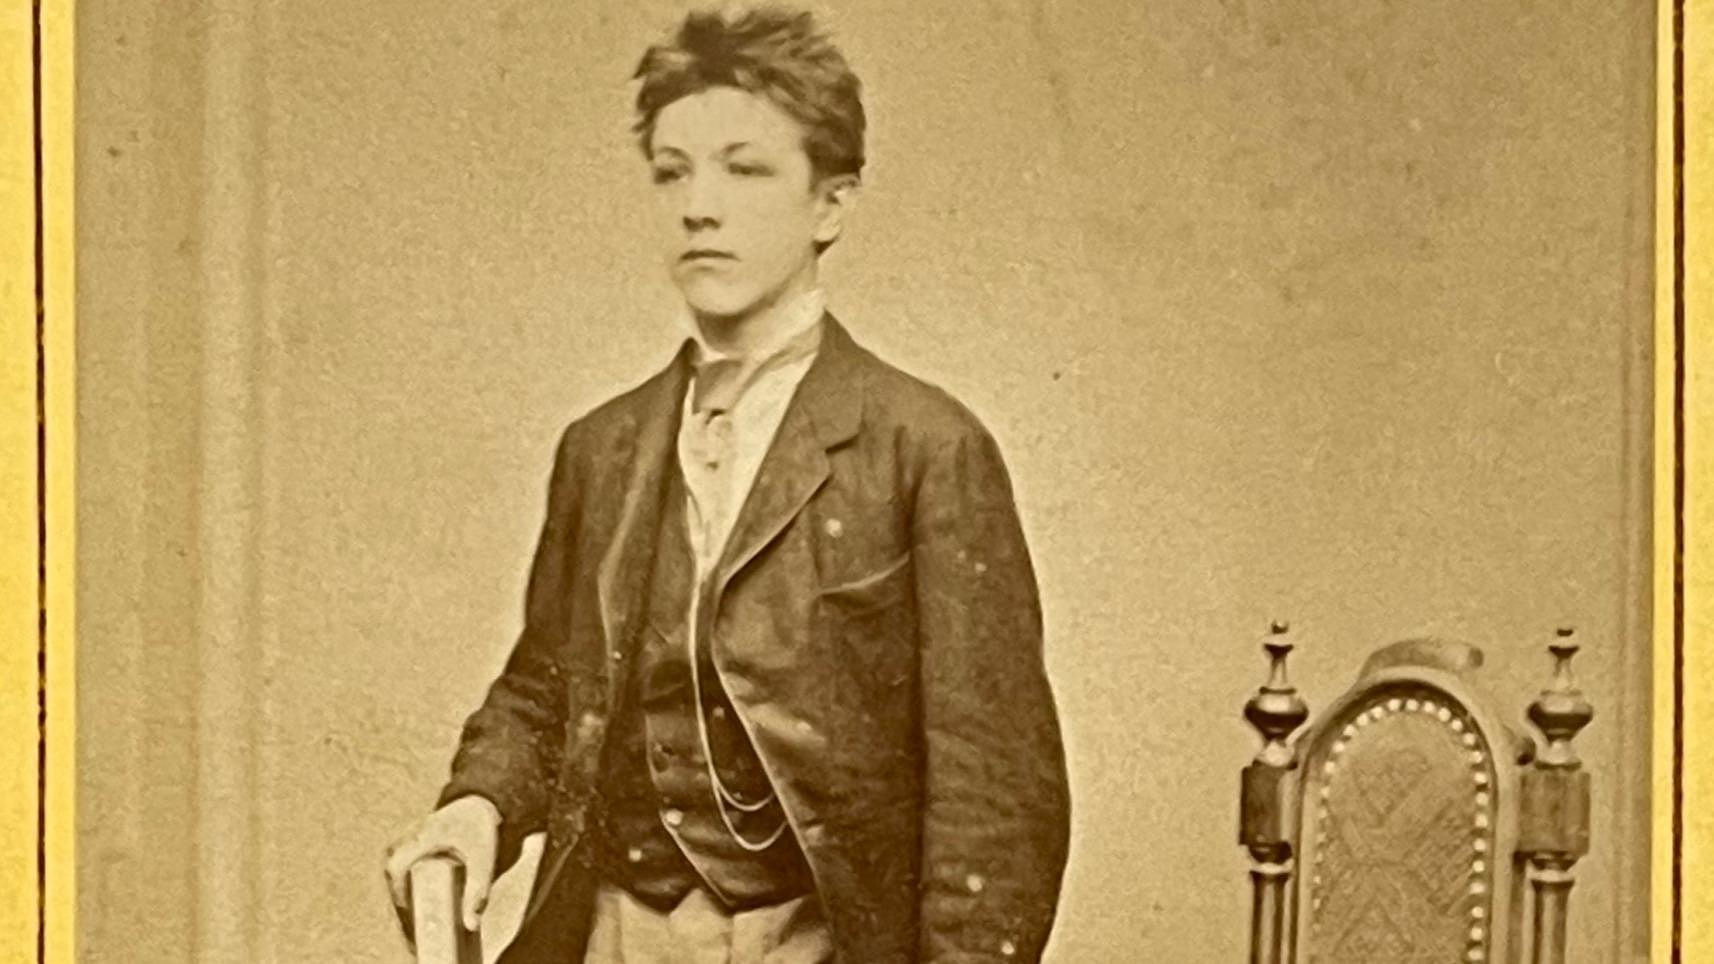 An unpublished photo of Rimbaud? An expert seeks to convince of its authenticity